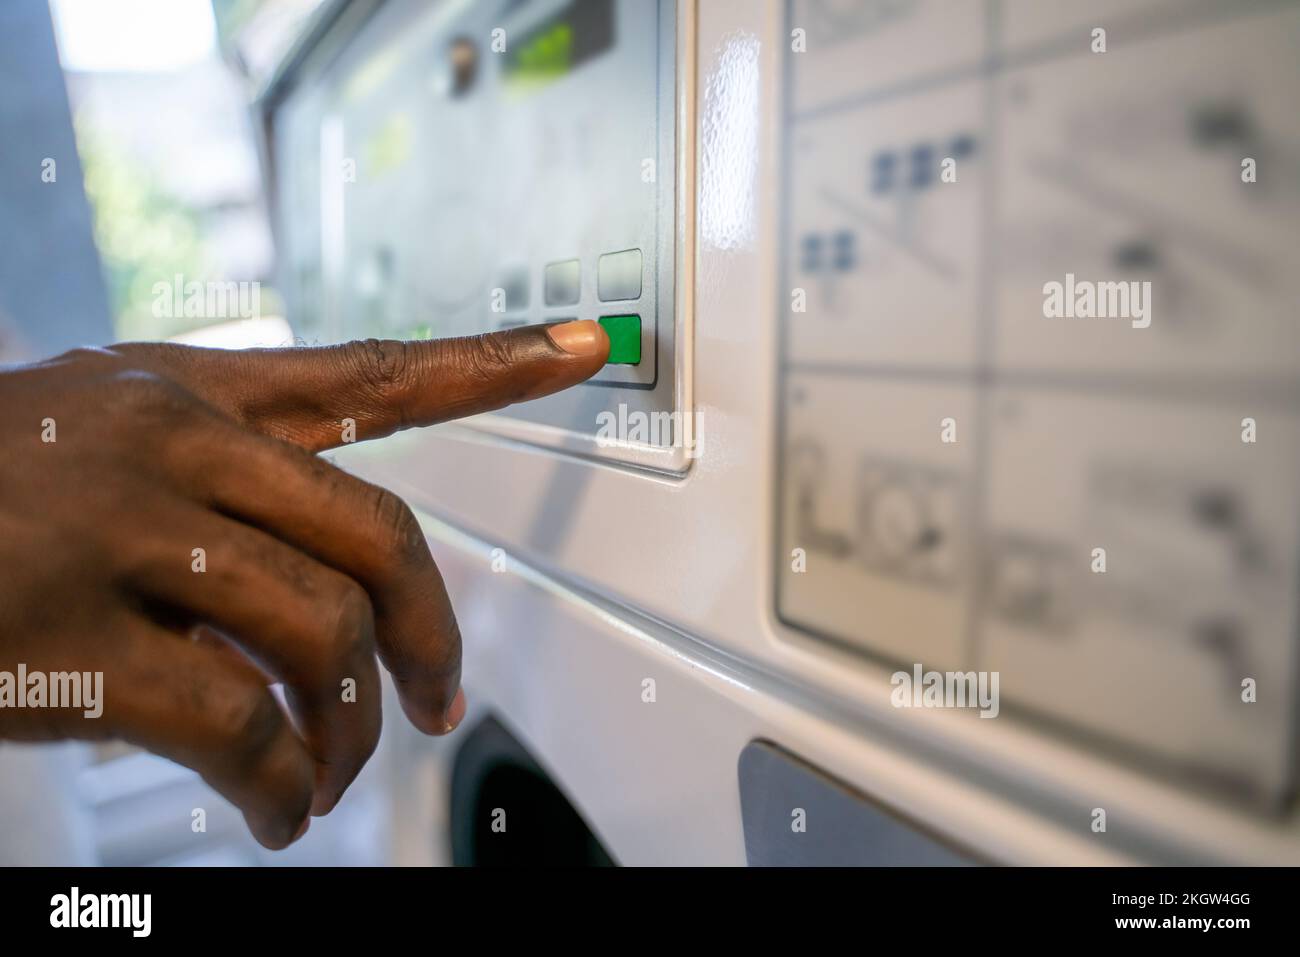 Person choosing the settings on a clothes washer Stock Photo